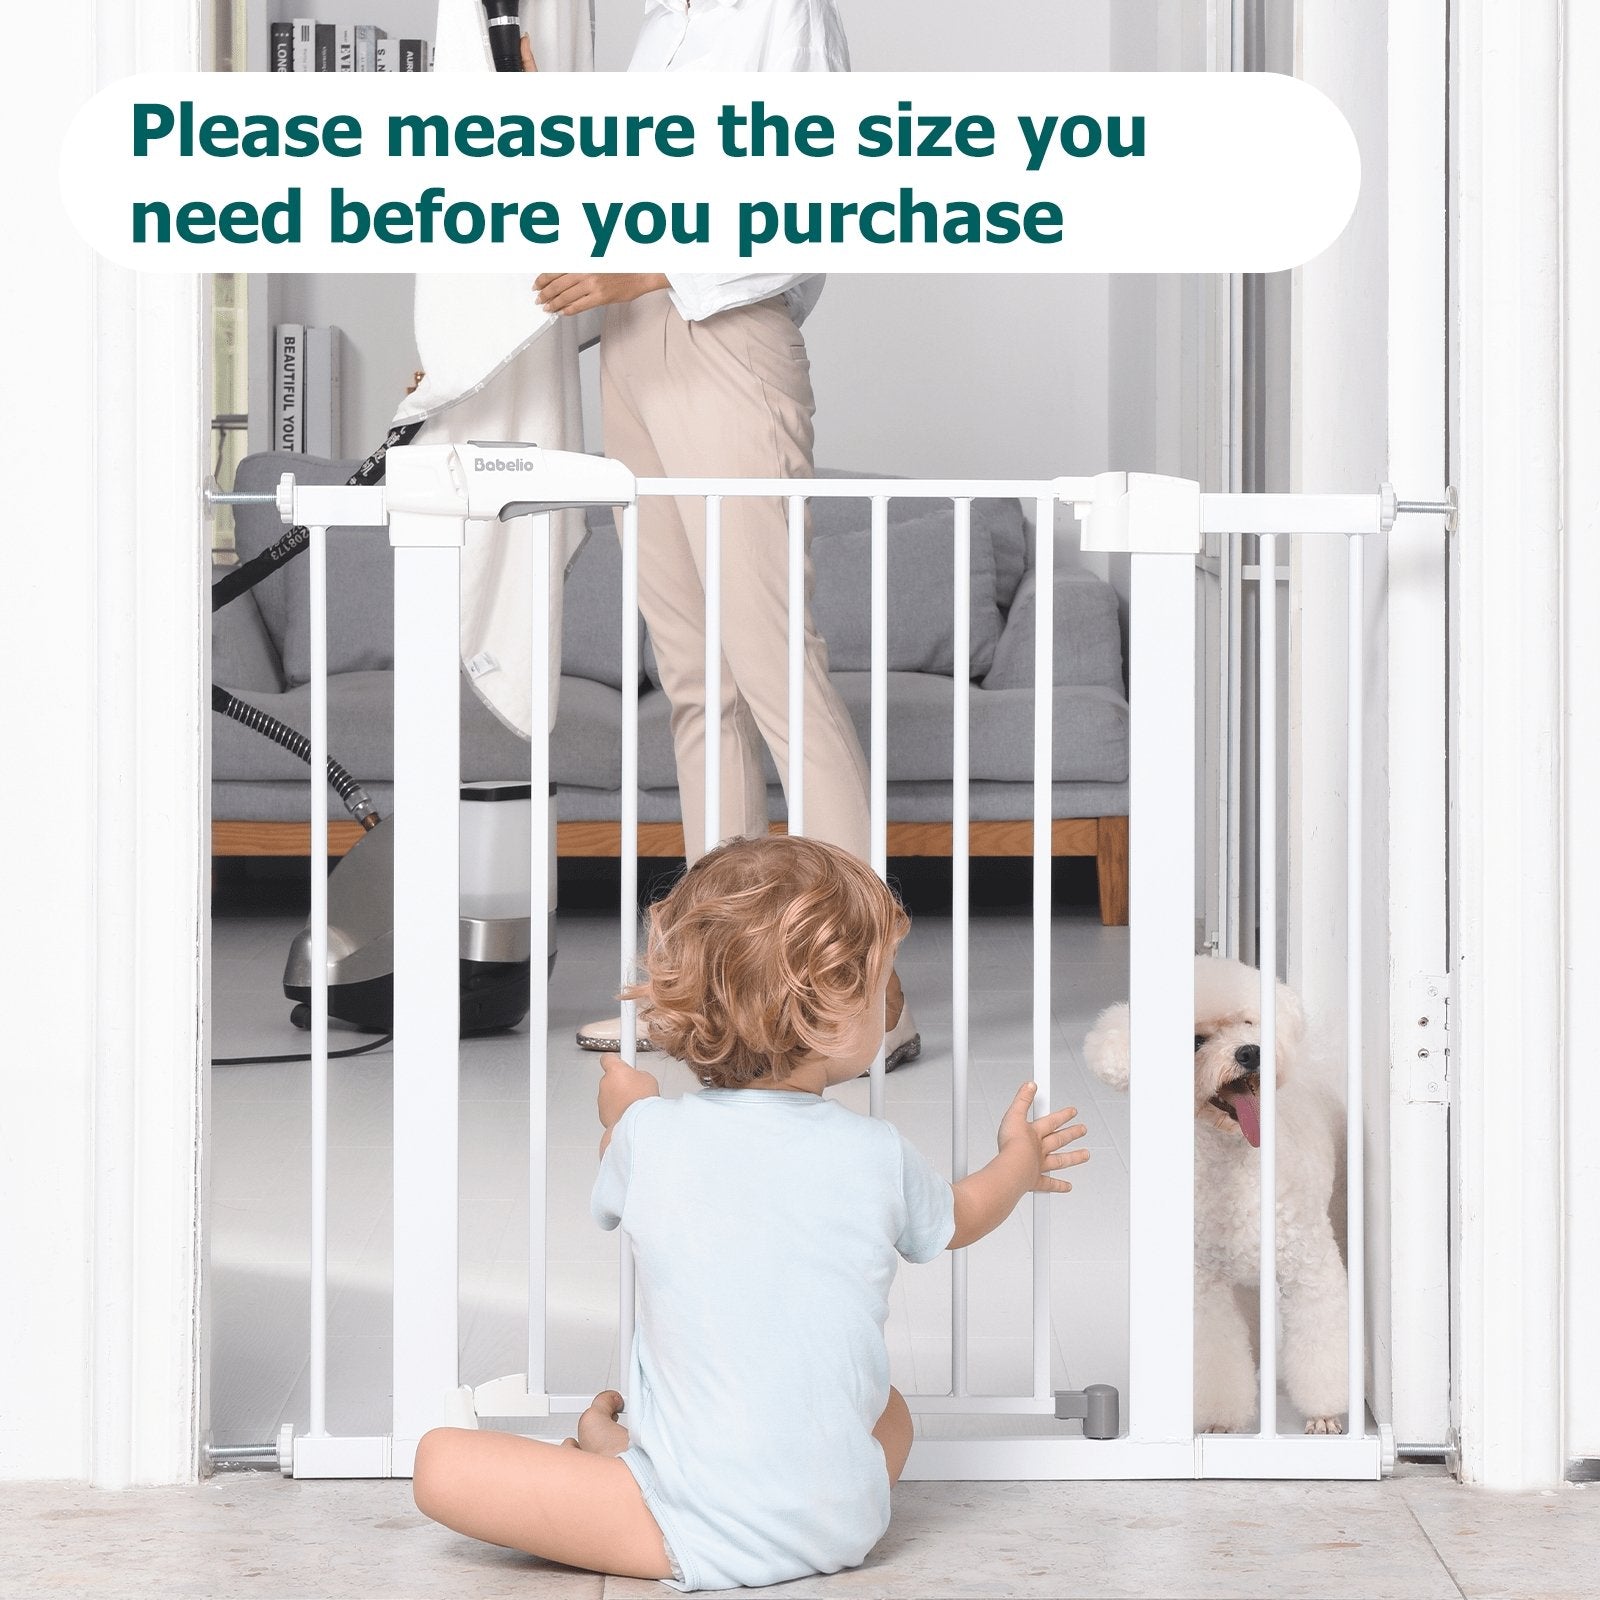 BABELIO Metal Baby Gate Dog Gate, 2.75 Inch and 5.5 Inch Extension, Extra Wide Pet Gate, 28" Tall - babeliobaby